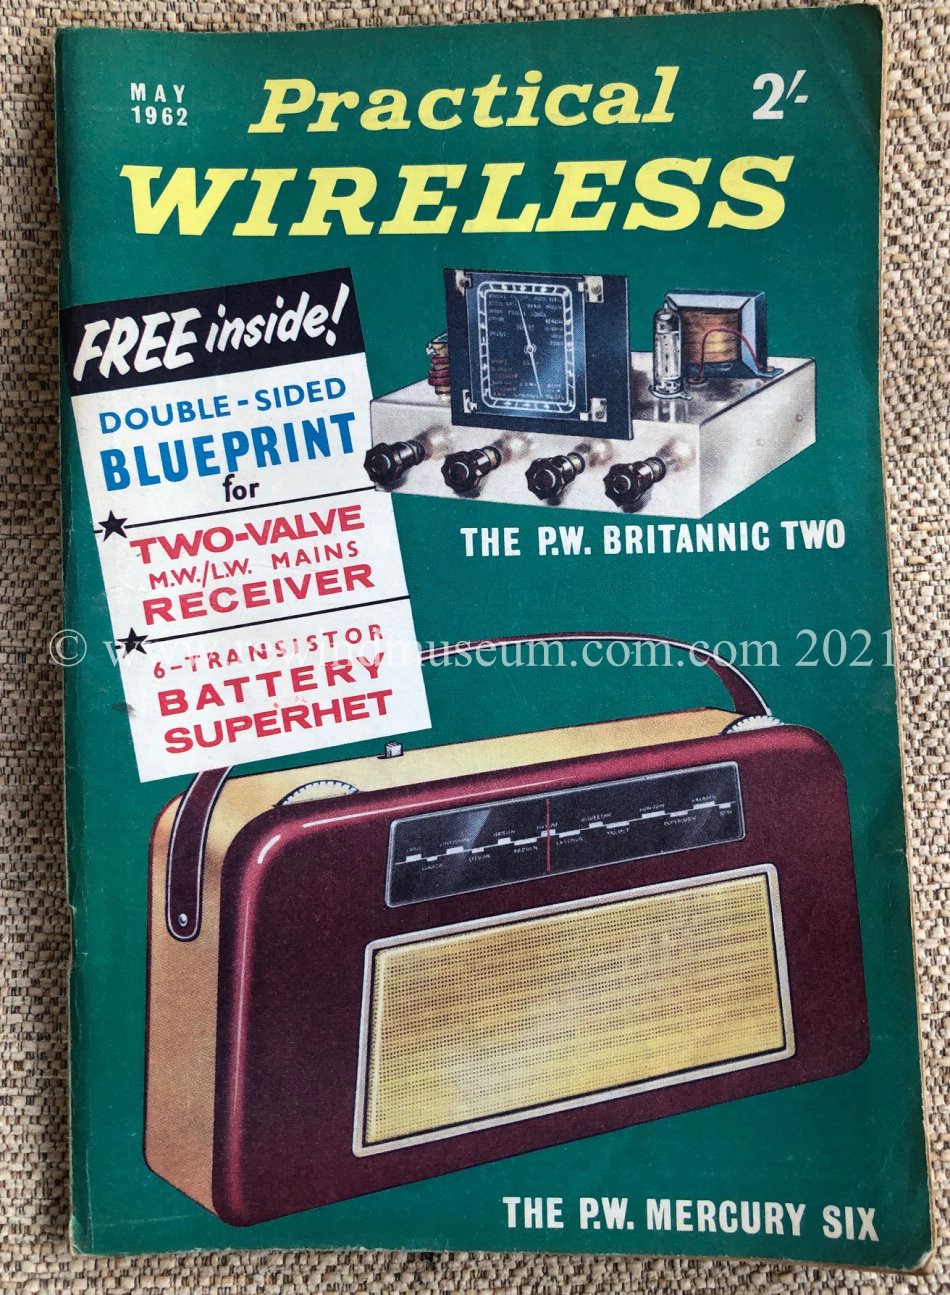 Practical Wireless May 1962